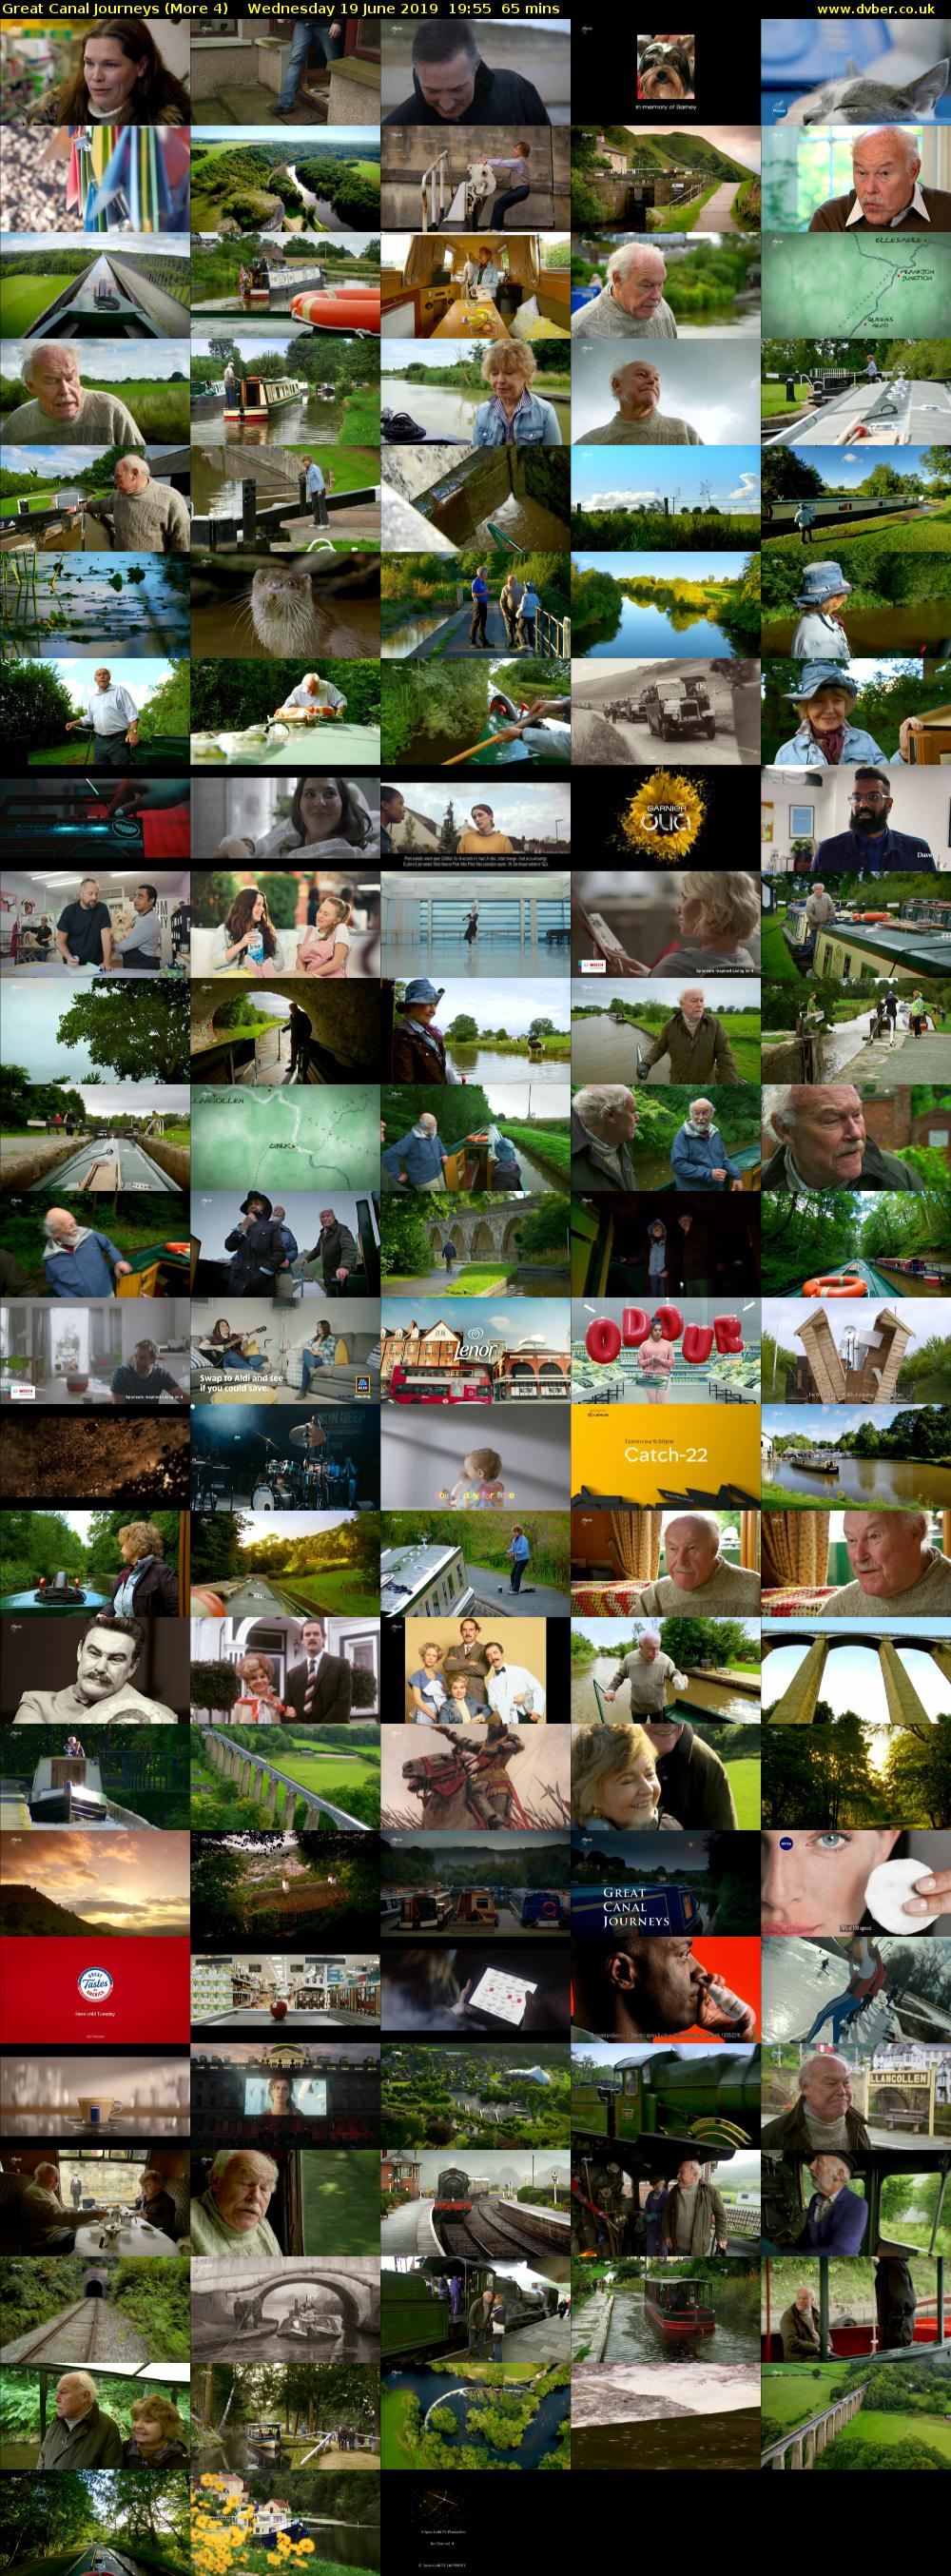 Great Canal Journeys (More 4) Wednesday 19 June 2019 19:55 - 21:00